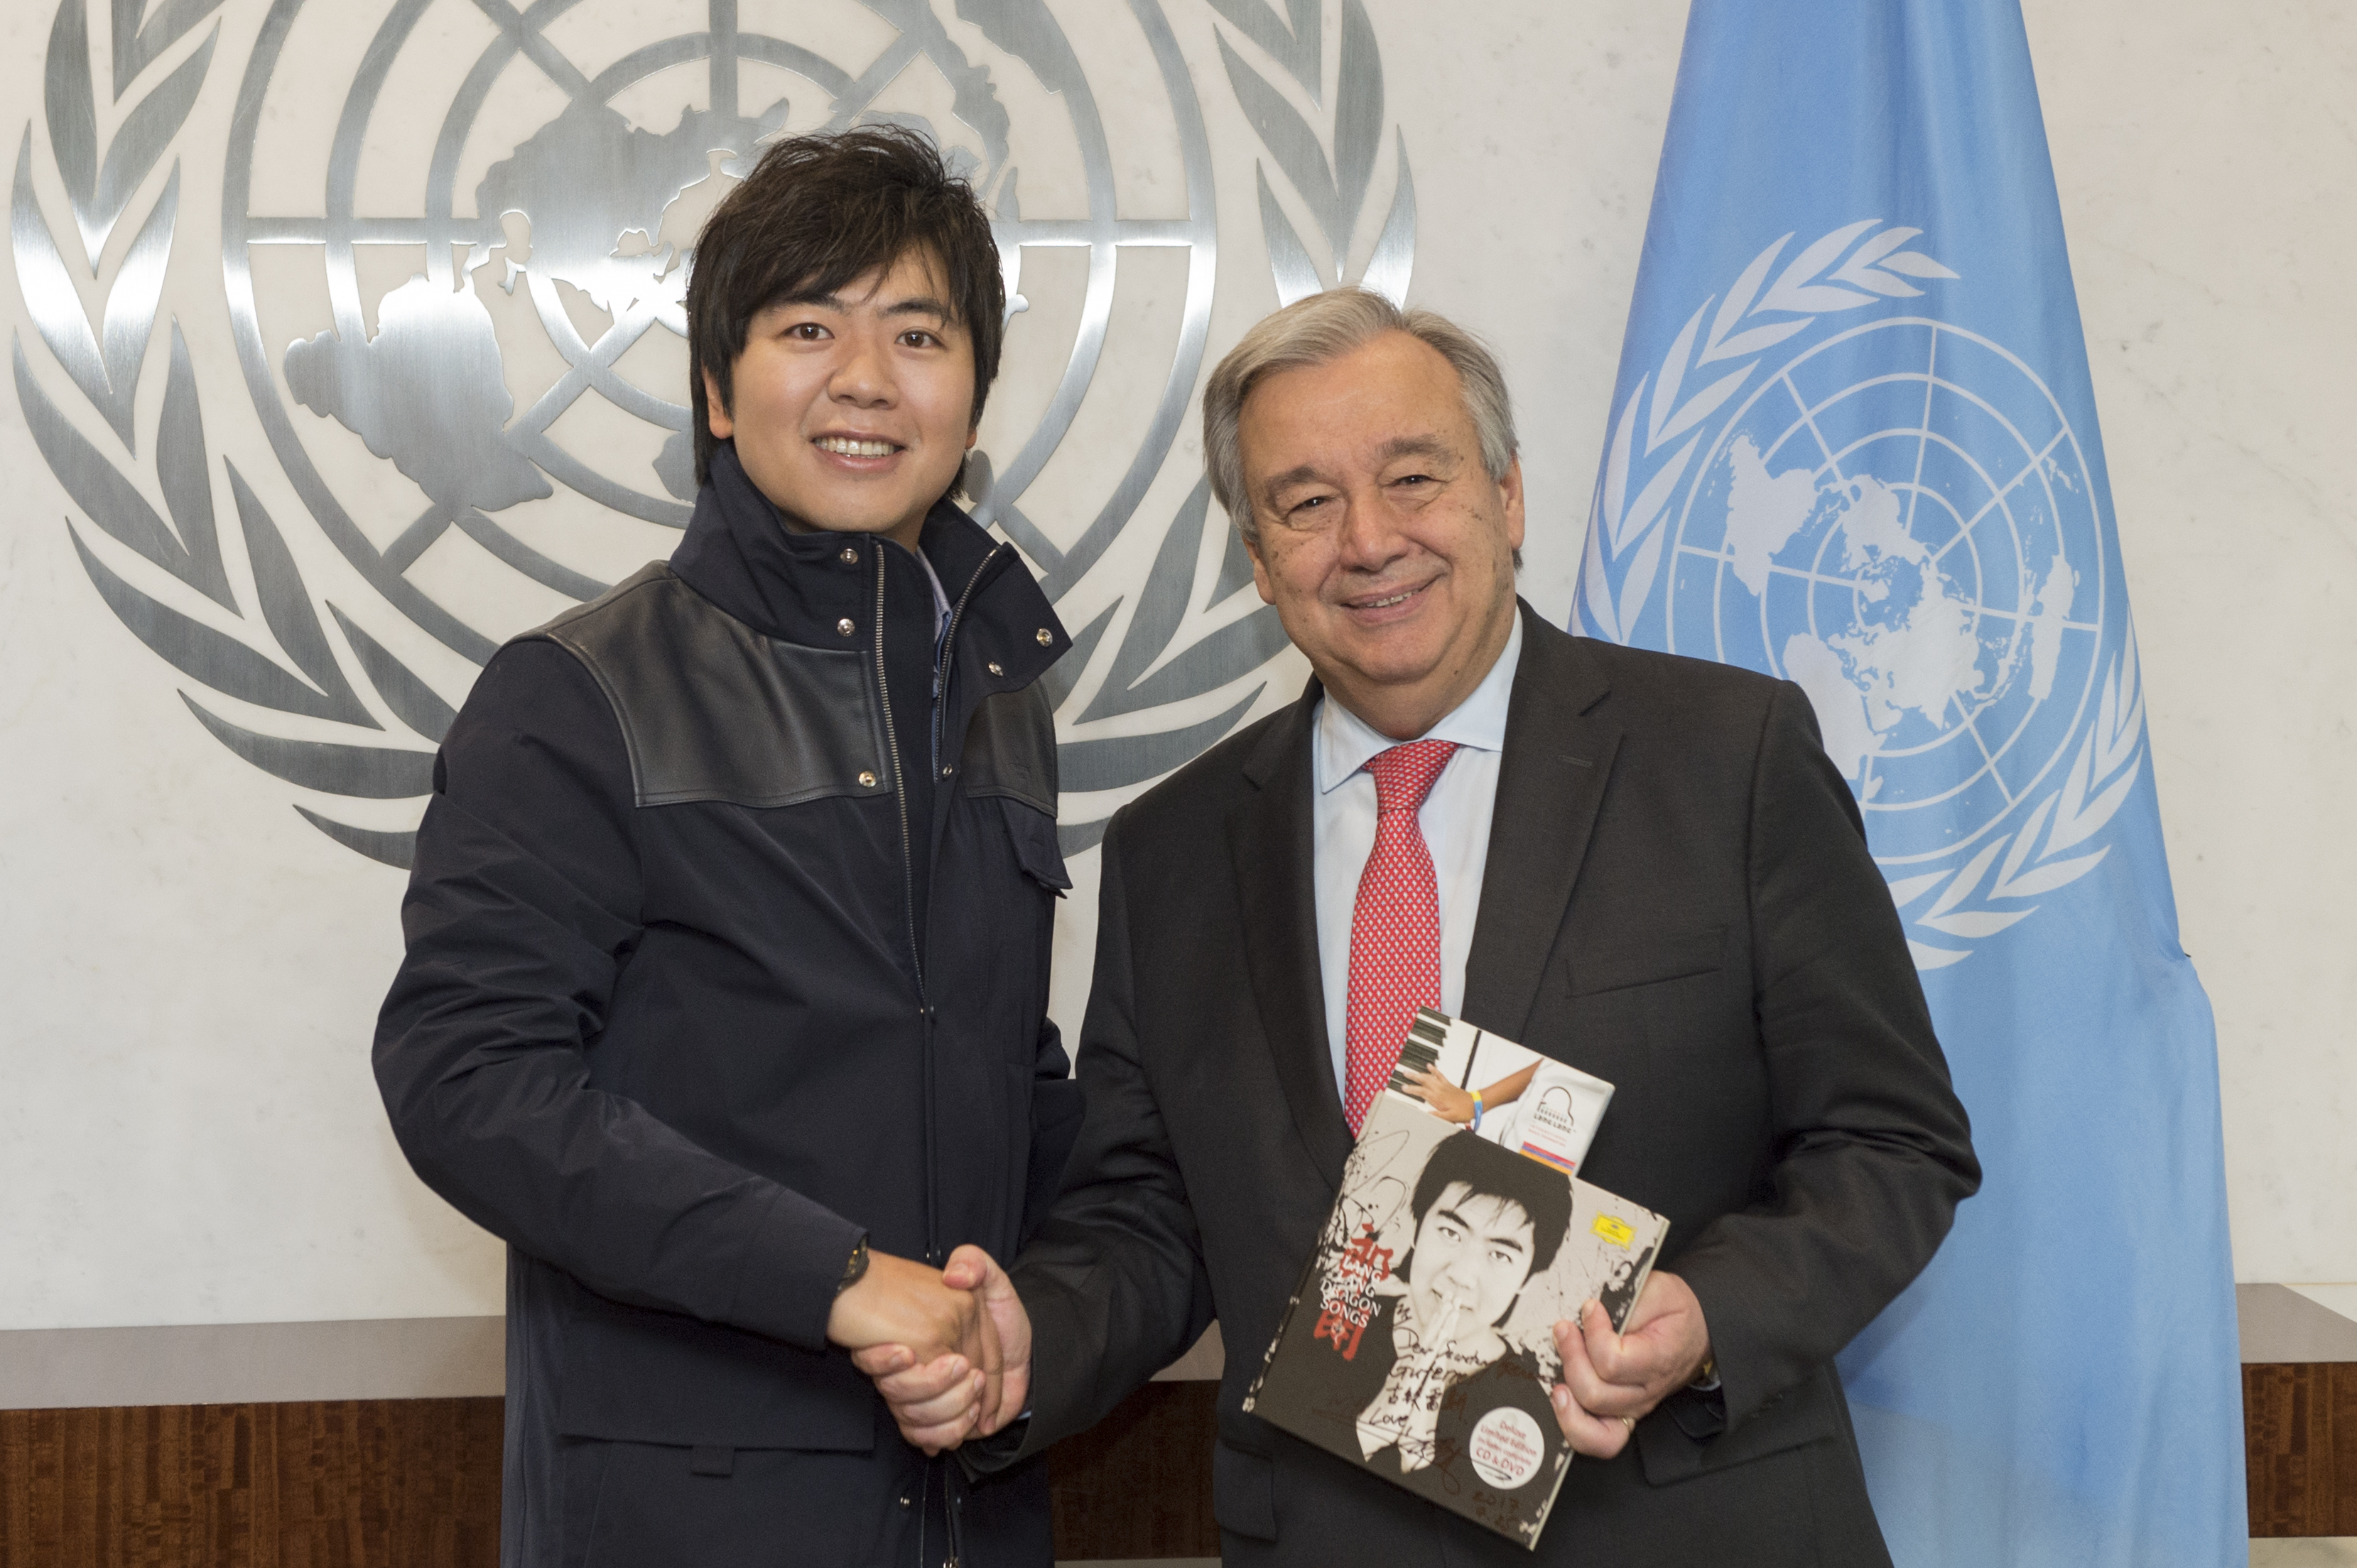 Secretary-General António Guterres meets with UN Messenger of Peace and pianist Lang Lang. 25 July 2017/UN Photo/Eskinder Debebe